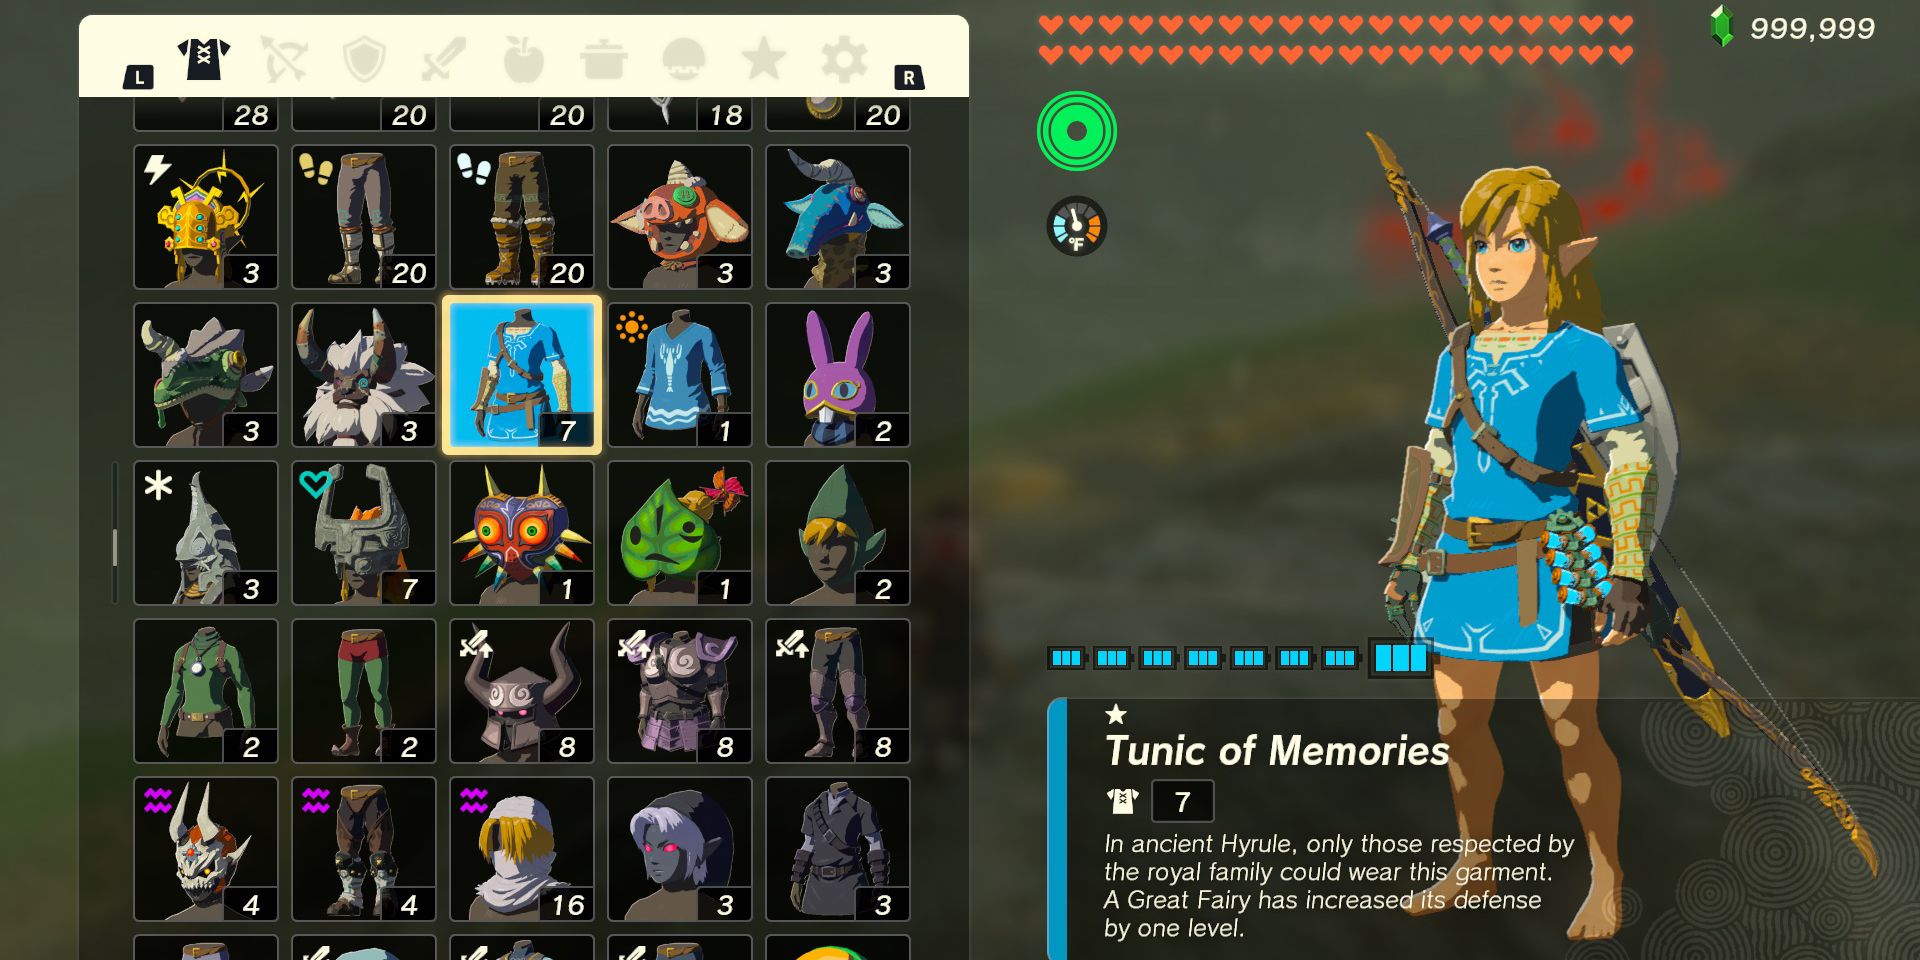 The Tunic of Memories armor piece in The Legend of Zelda: Tears of the Kingdom